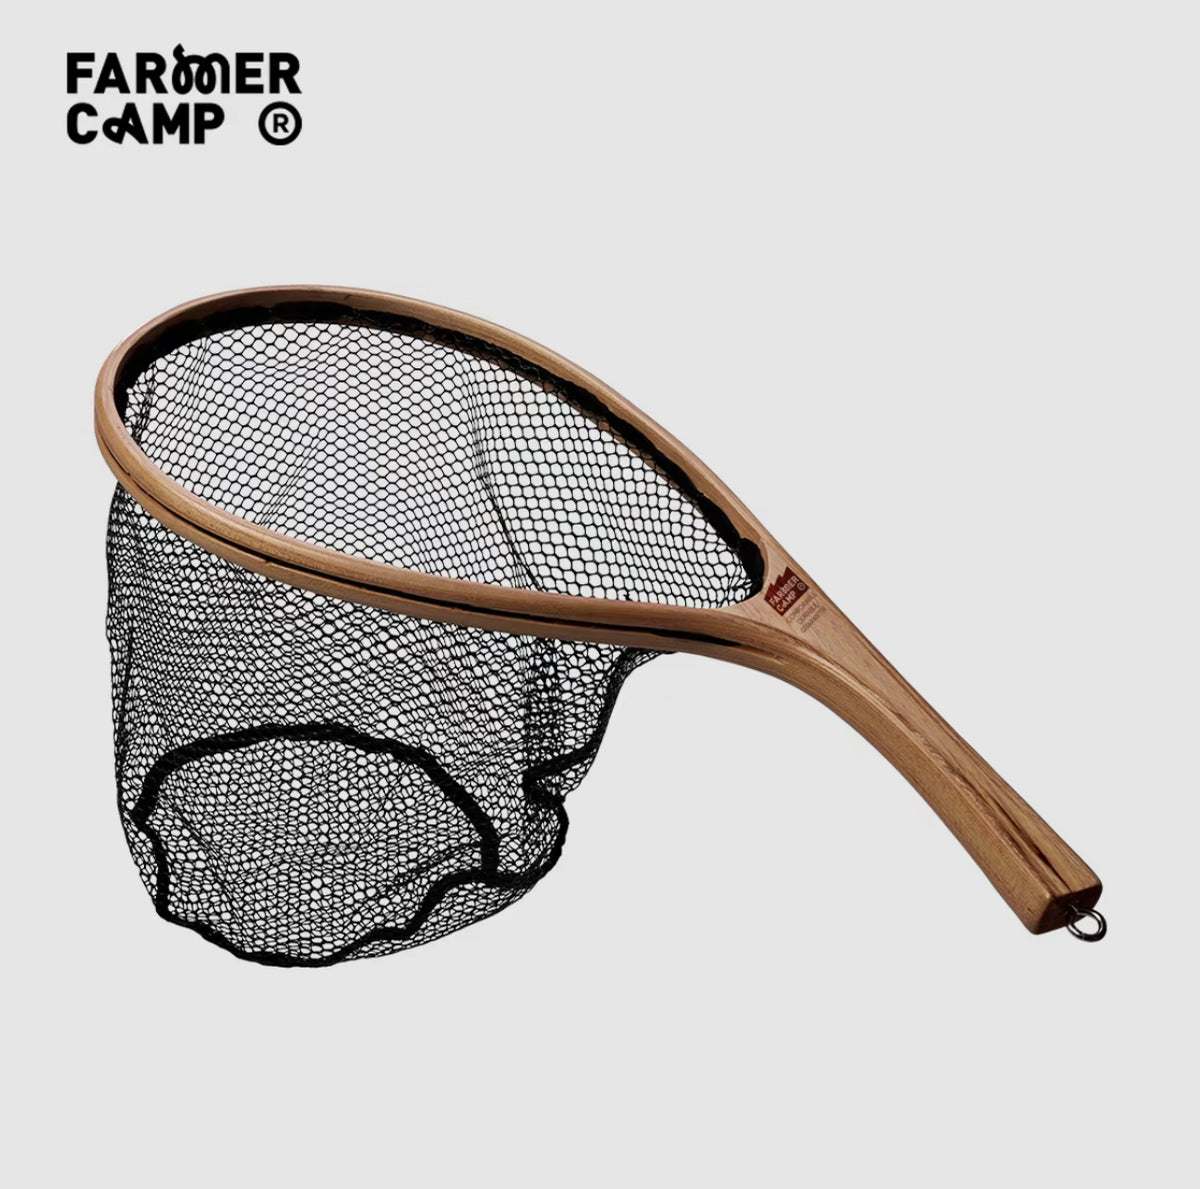 A minnow plunge net designed for microfishing.